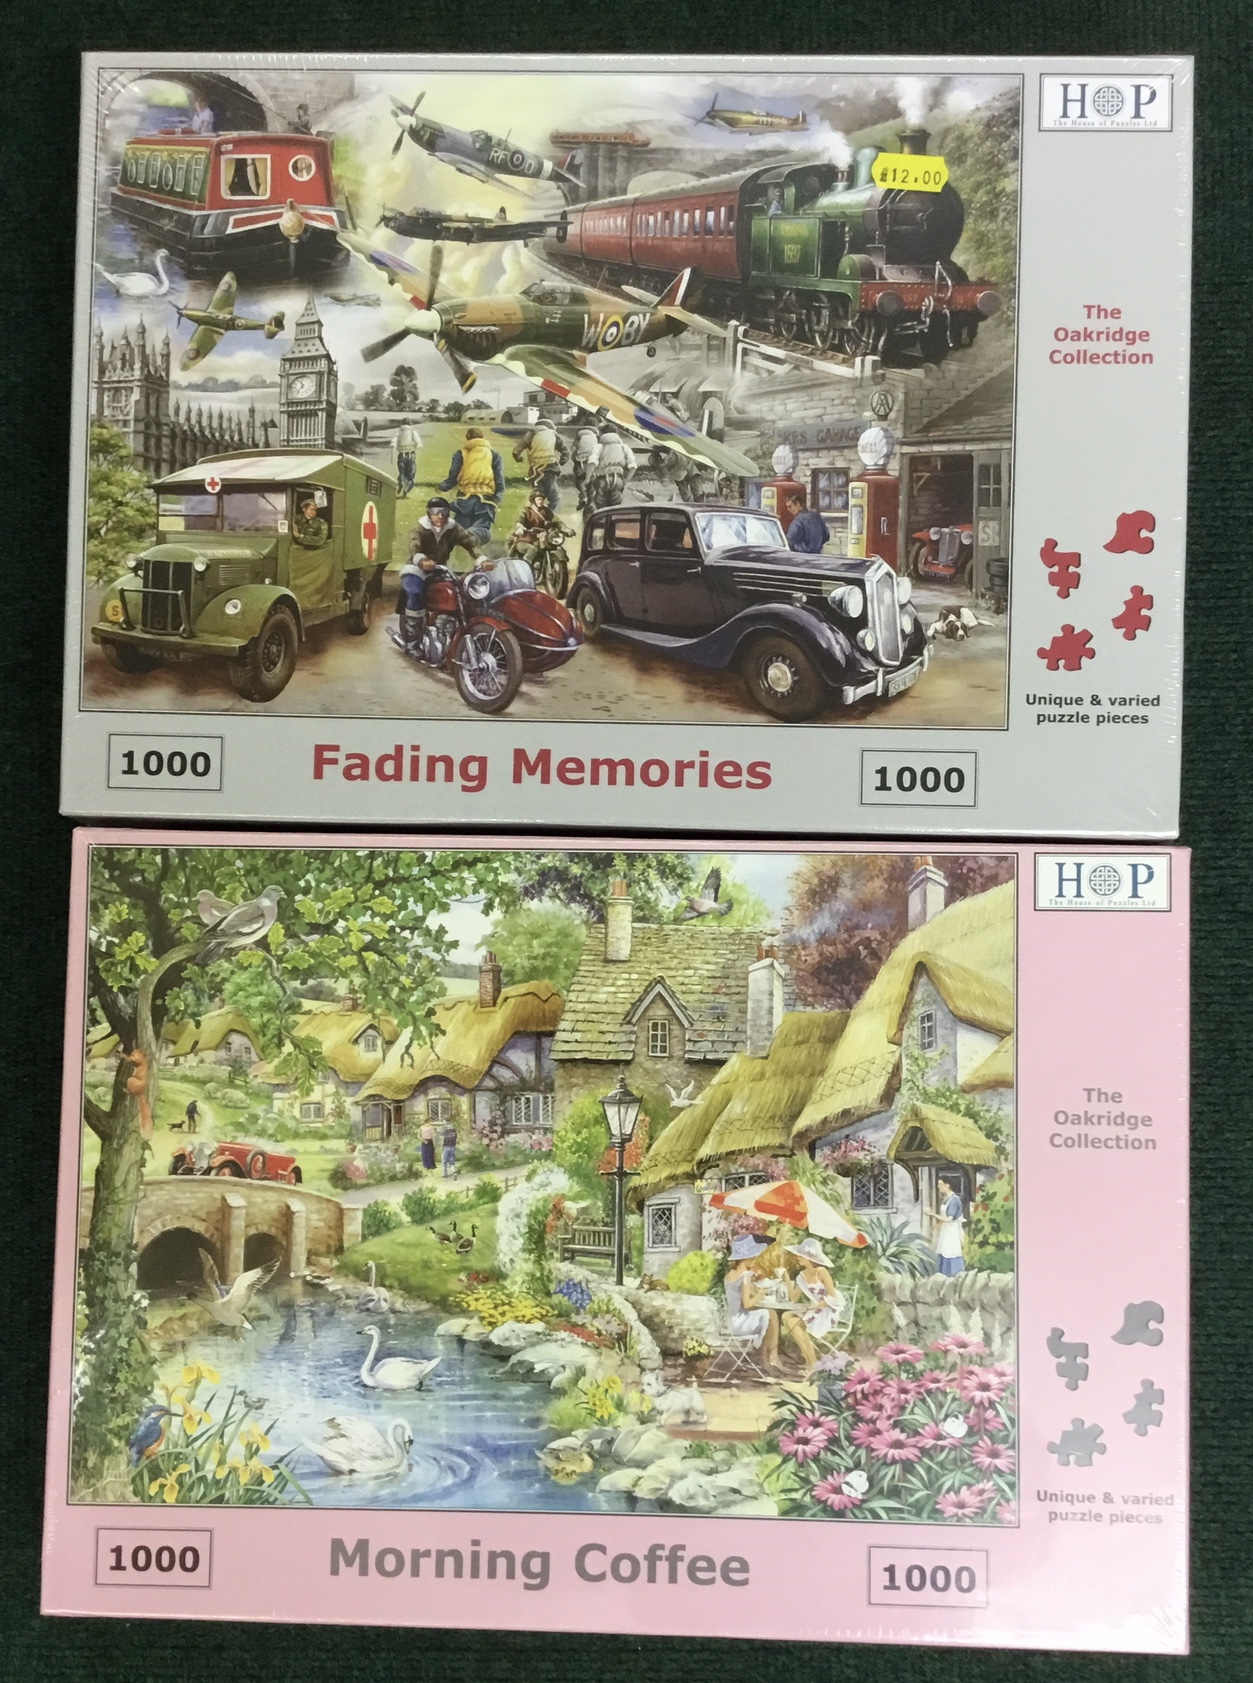 House of Puzzles "Morning Coffee" Oakridge Collection 1000pc Jigsaw Puzzle 